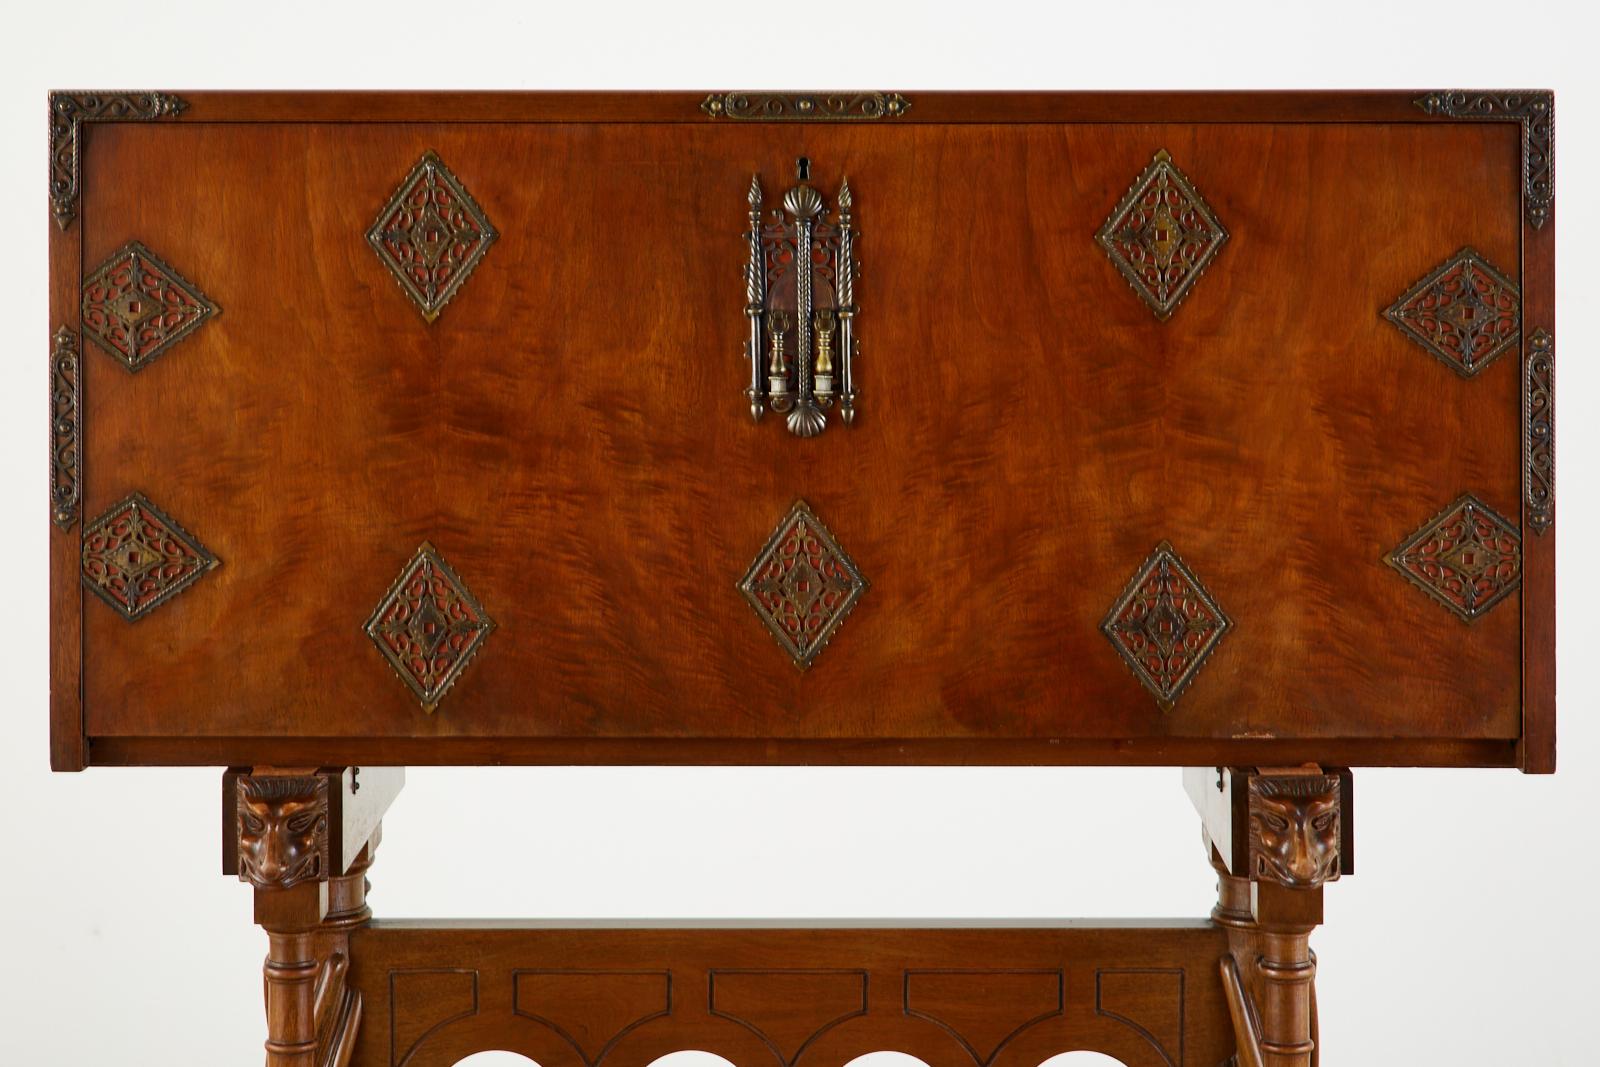 Hand-Crafted Spanish Baroque Style Vargueño Cabinet Desk on Stand